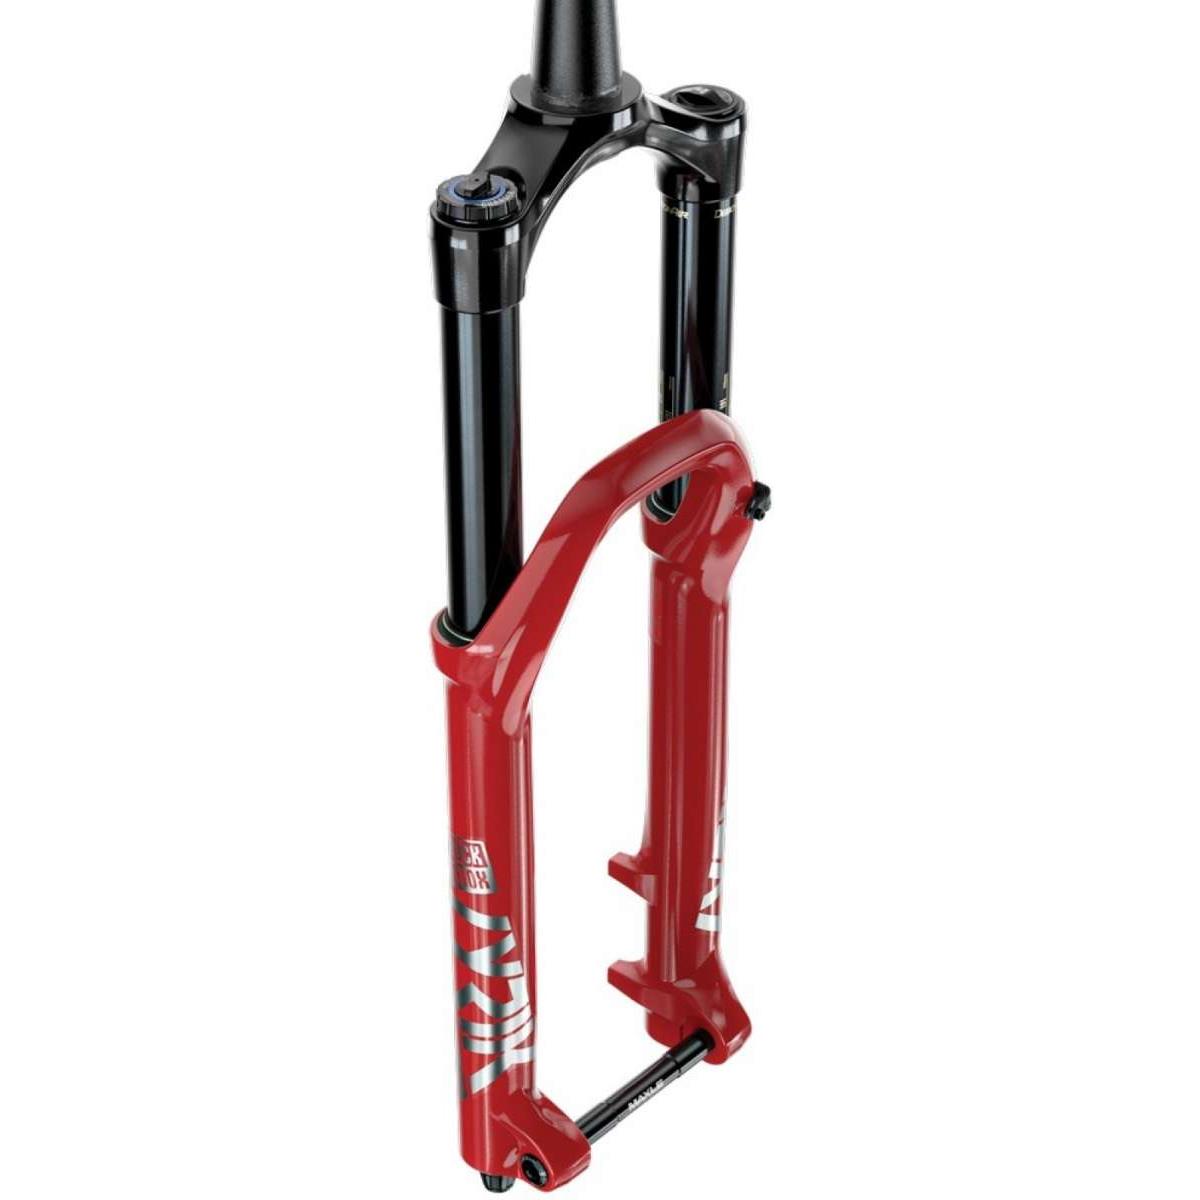 RockShox Forcella Lyric Ultimate RC2 27,5 Inch, 15x110 mm, 37 mm Offset, Red